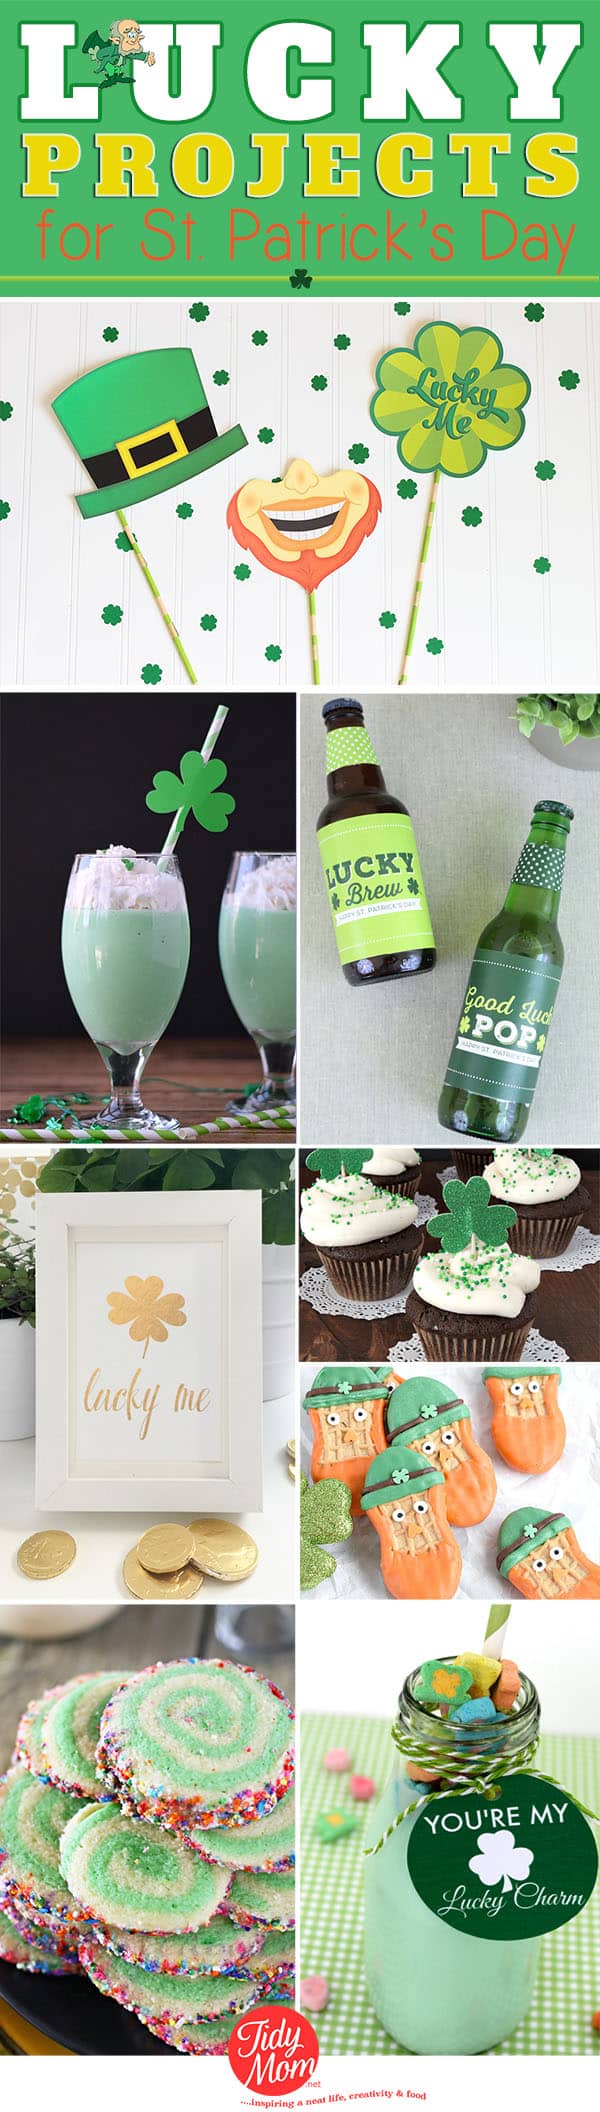 Find a variety of LUCKY PROJECTS to make for St. Patrick's Day at TidyMom.net